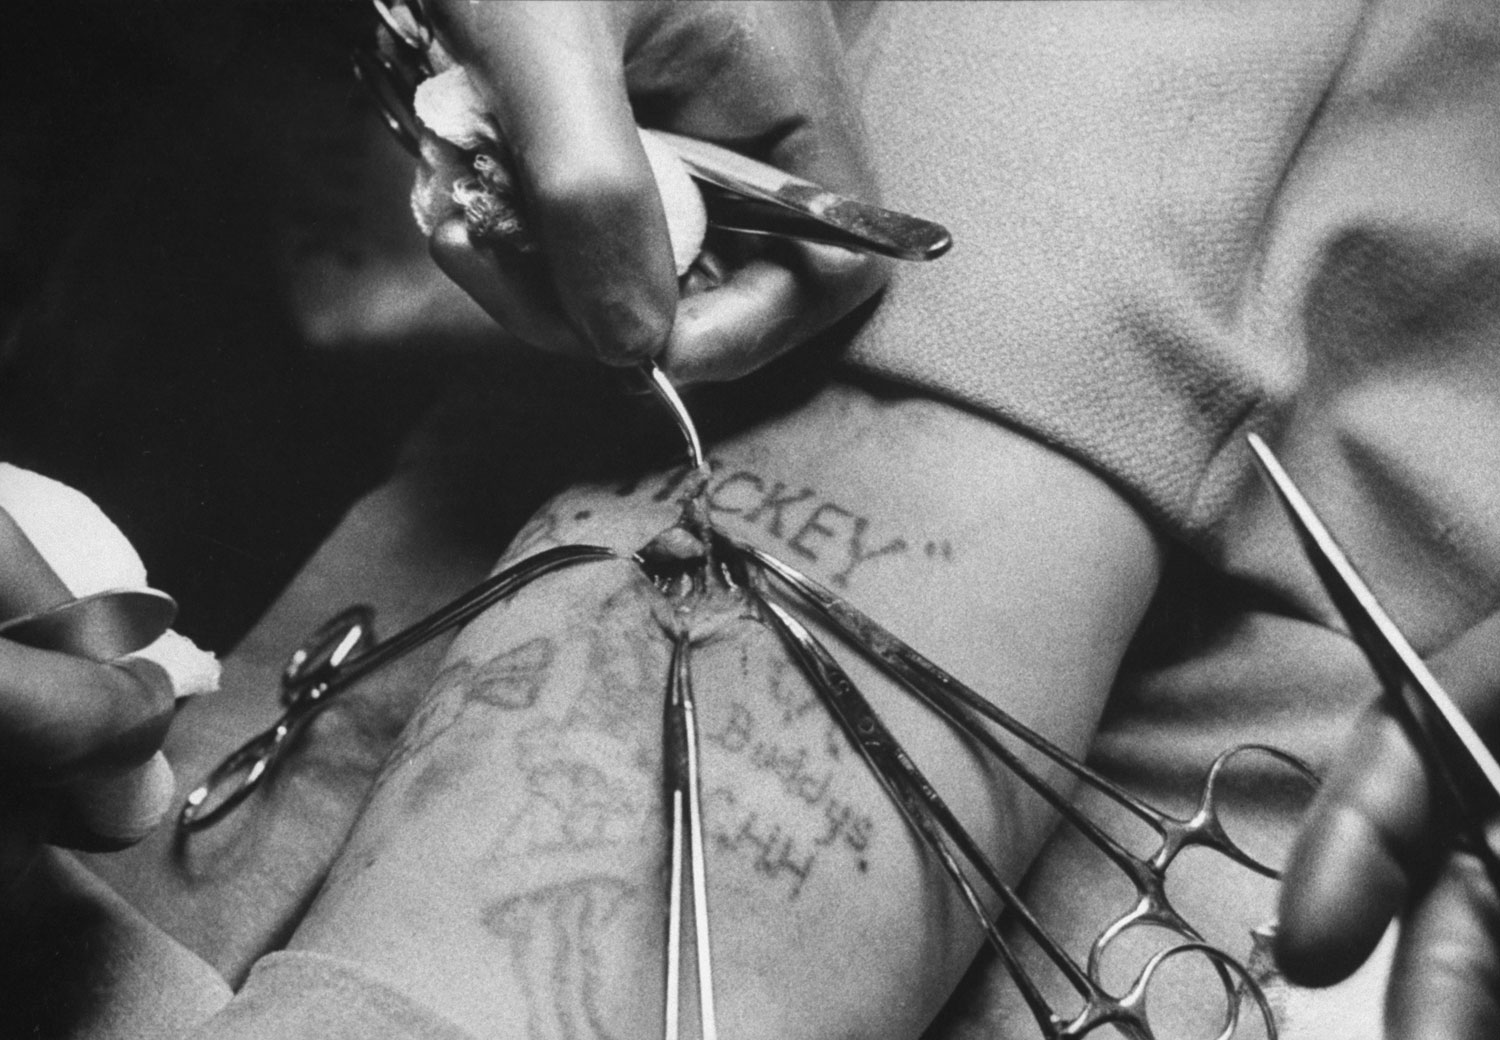 Doctors at Ohio State Penitentiary remove growth of pre-injected cancerous cells from a prisoner's arm, 1958.